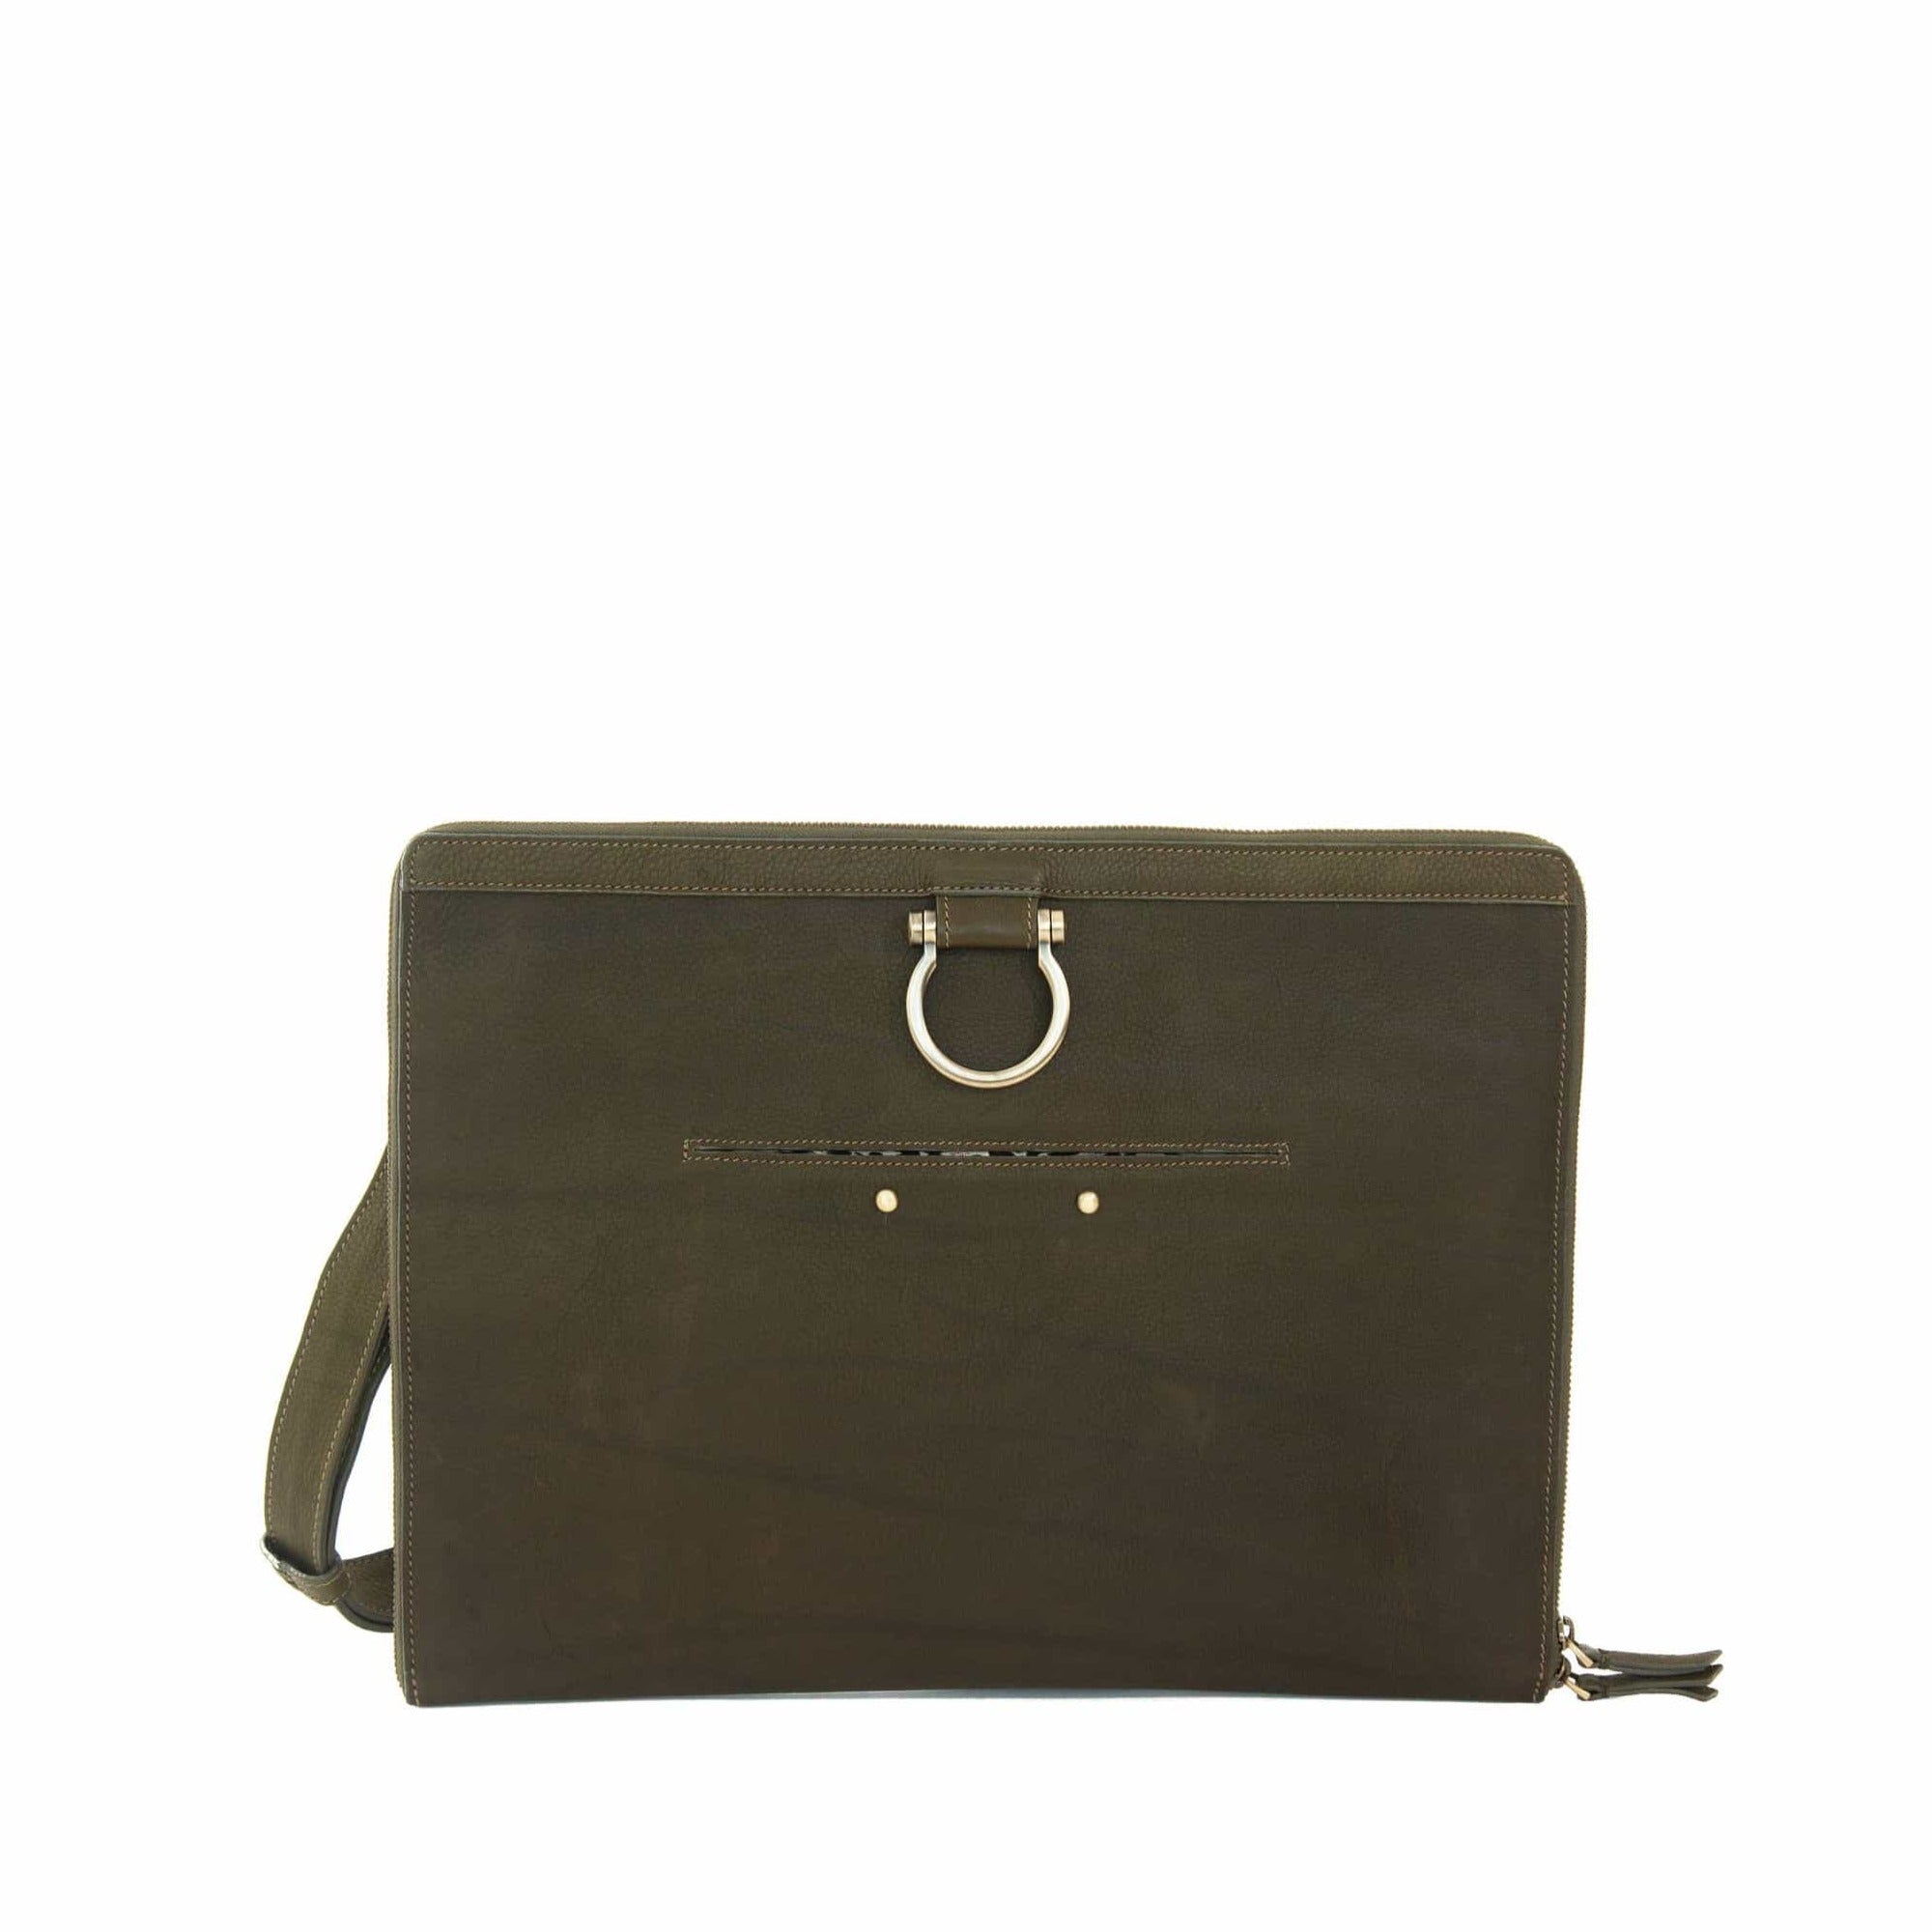 The M XL crossbody bag in olive green raw leather has a zip enclosure, front exterior stud pocket, and Omega hardware.